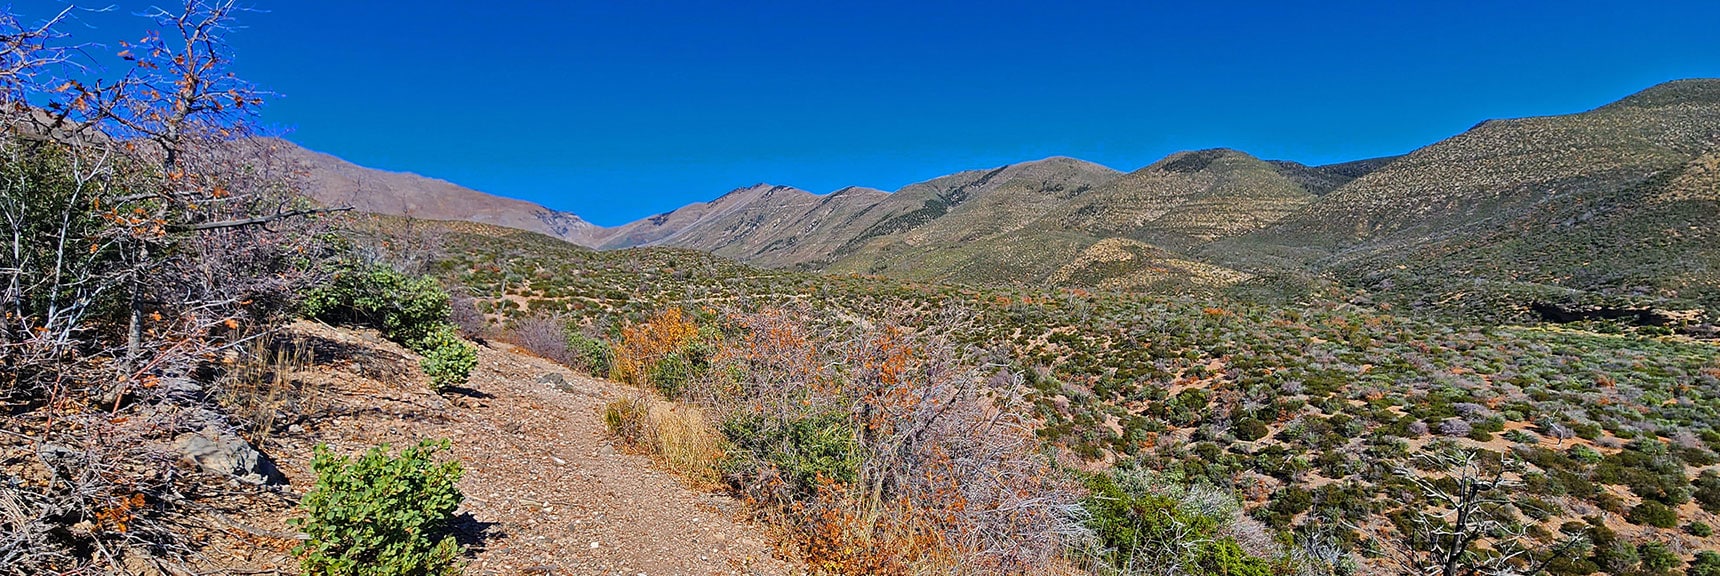 Rounding Hills, Wilson Ridge to Harris Mt., Lovell Canyon East Side Now in View. | Schaefer Springs Loop Trail | Lovell Canyon, Nevada